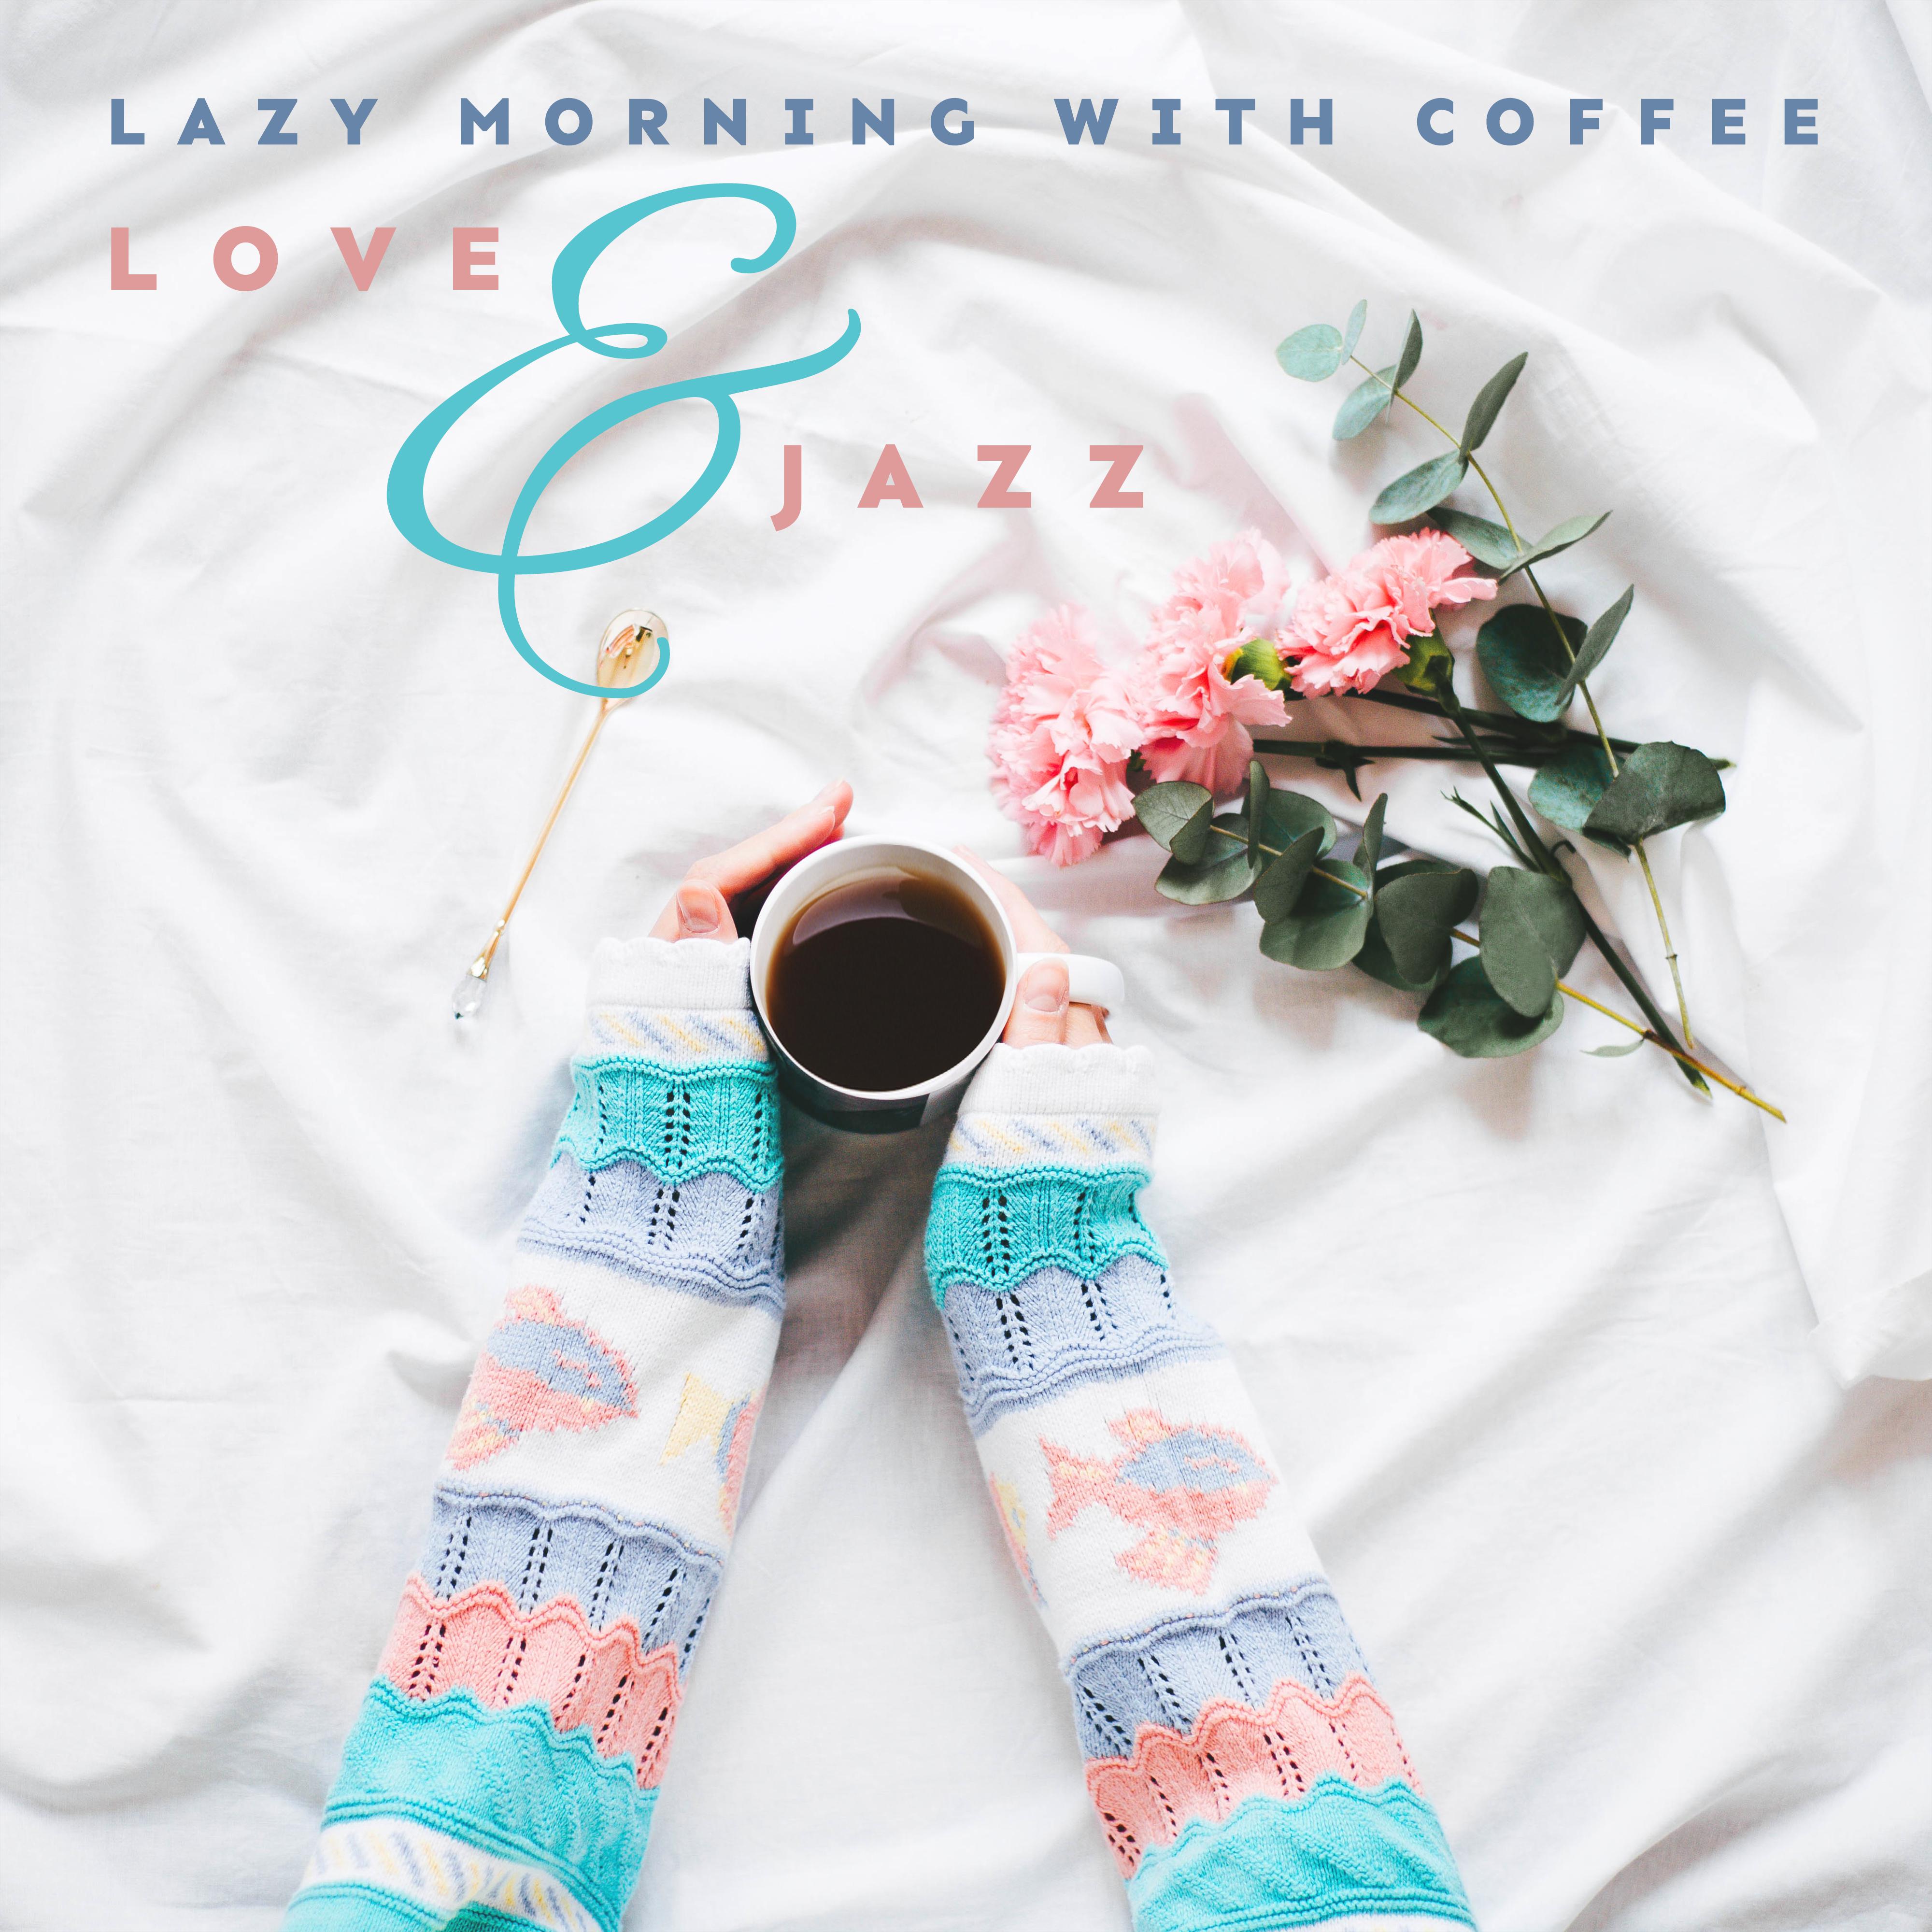 Lazy Morning with Coffee, Love & Jazz: 2019 Smooth Jazz Music Selection Composed for Spending Blissful Mornings,Breakfast & Coffee Songs, Instrumental Tracks Perfect for Cafe of Home